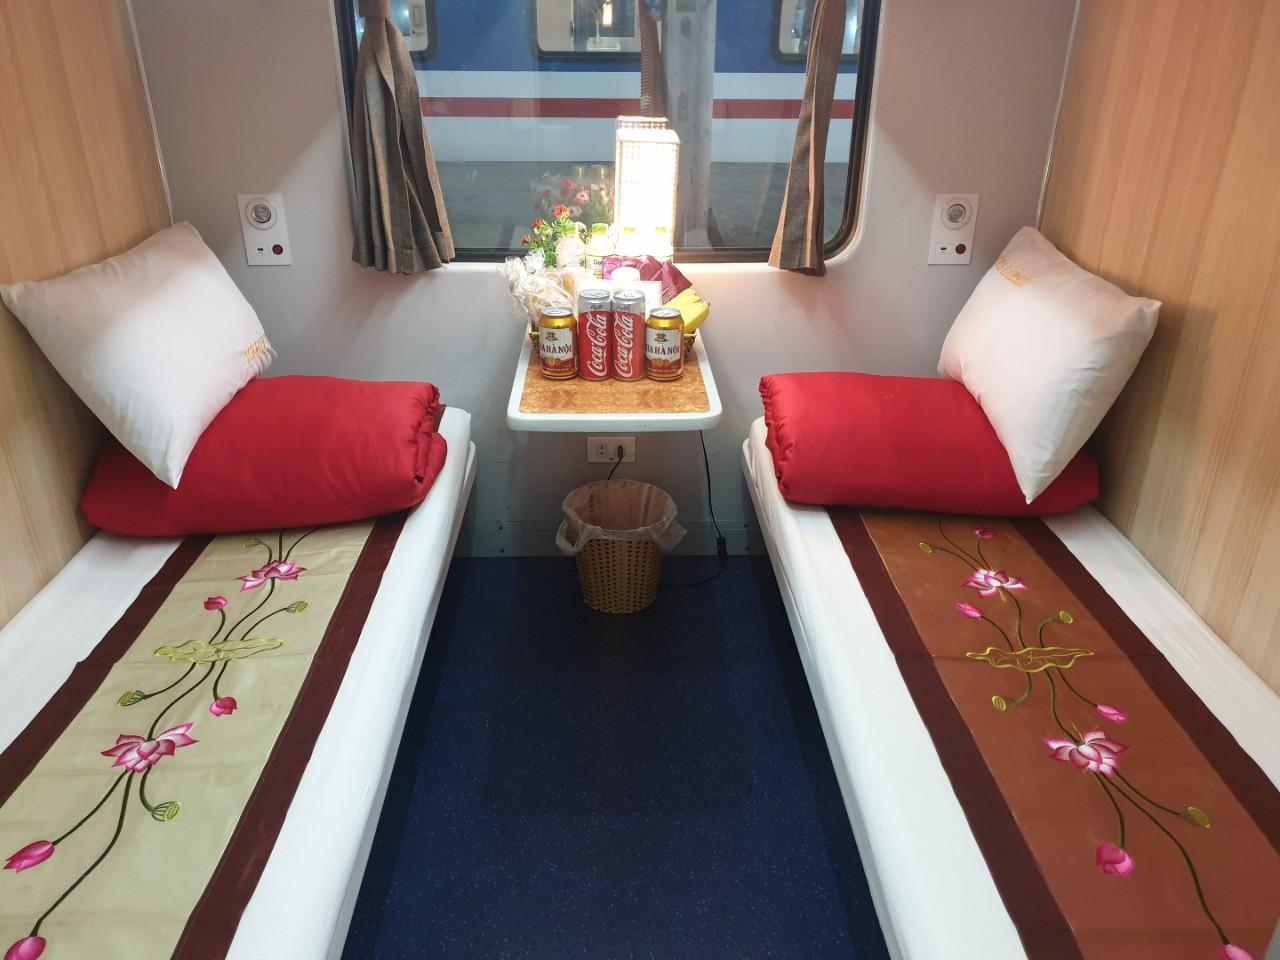 Ninh Binh – Hue on SE19 (22h10 – 09h30) Only available from 07 Feb 2023 (Deluxe 4 Berths Cabin, One Way)